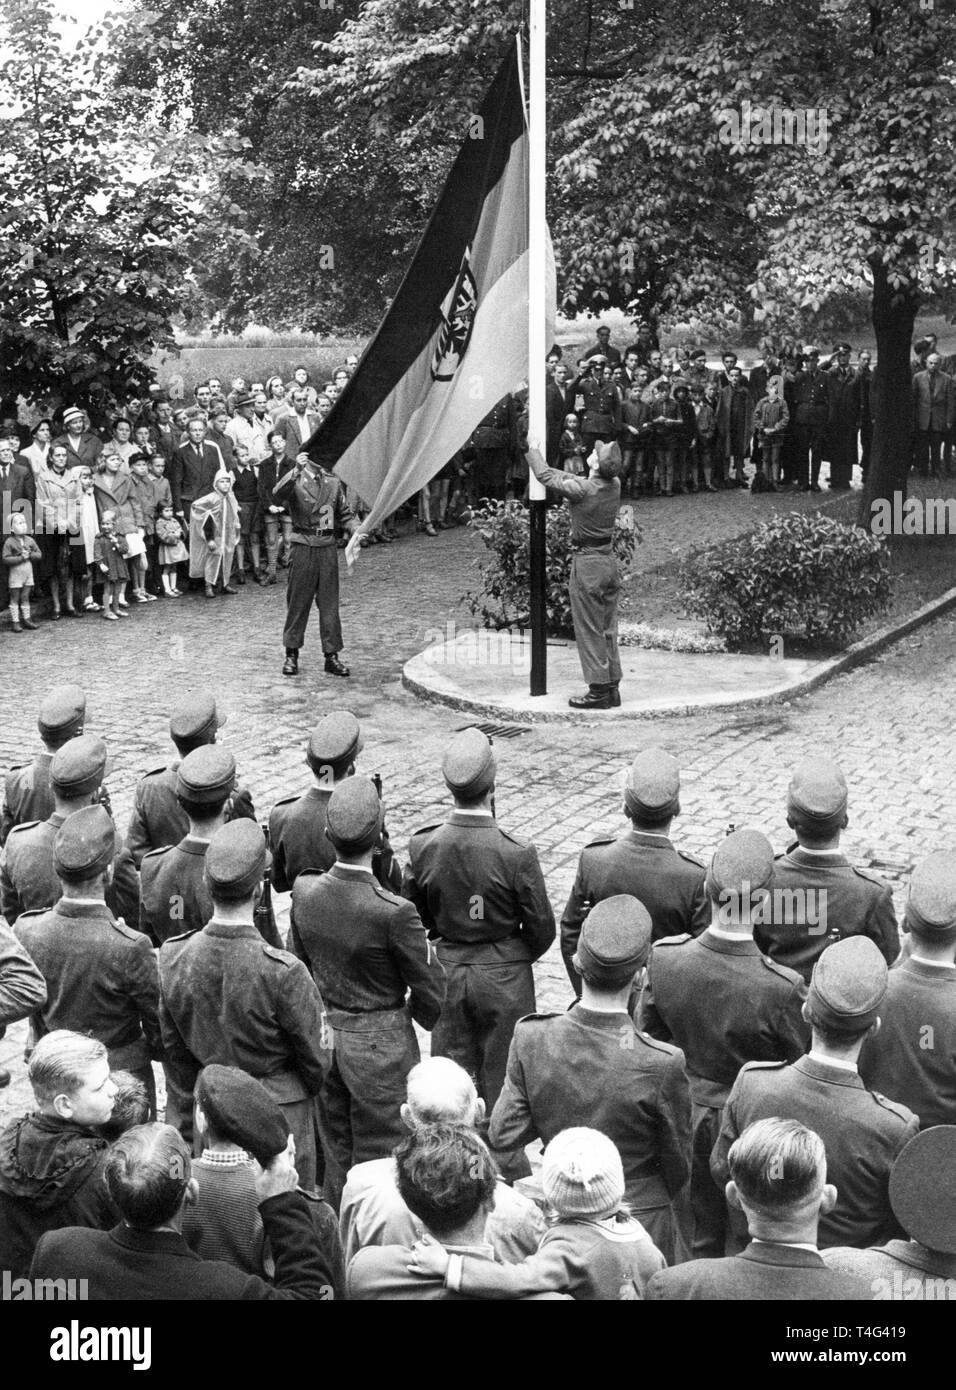 The West German flag was hoisted on 23 July 1956 in Unna - Germany. The  German armed forces - Bundeswehr - took over the barracks after the belgian  troops left. | usage worldwide Stock Photo - Alamy